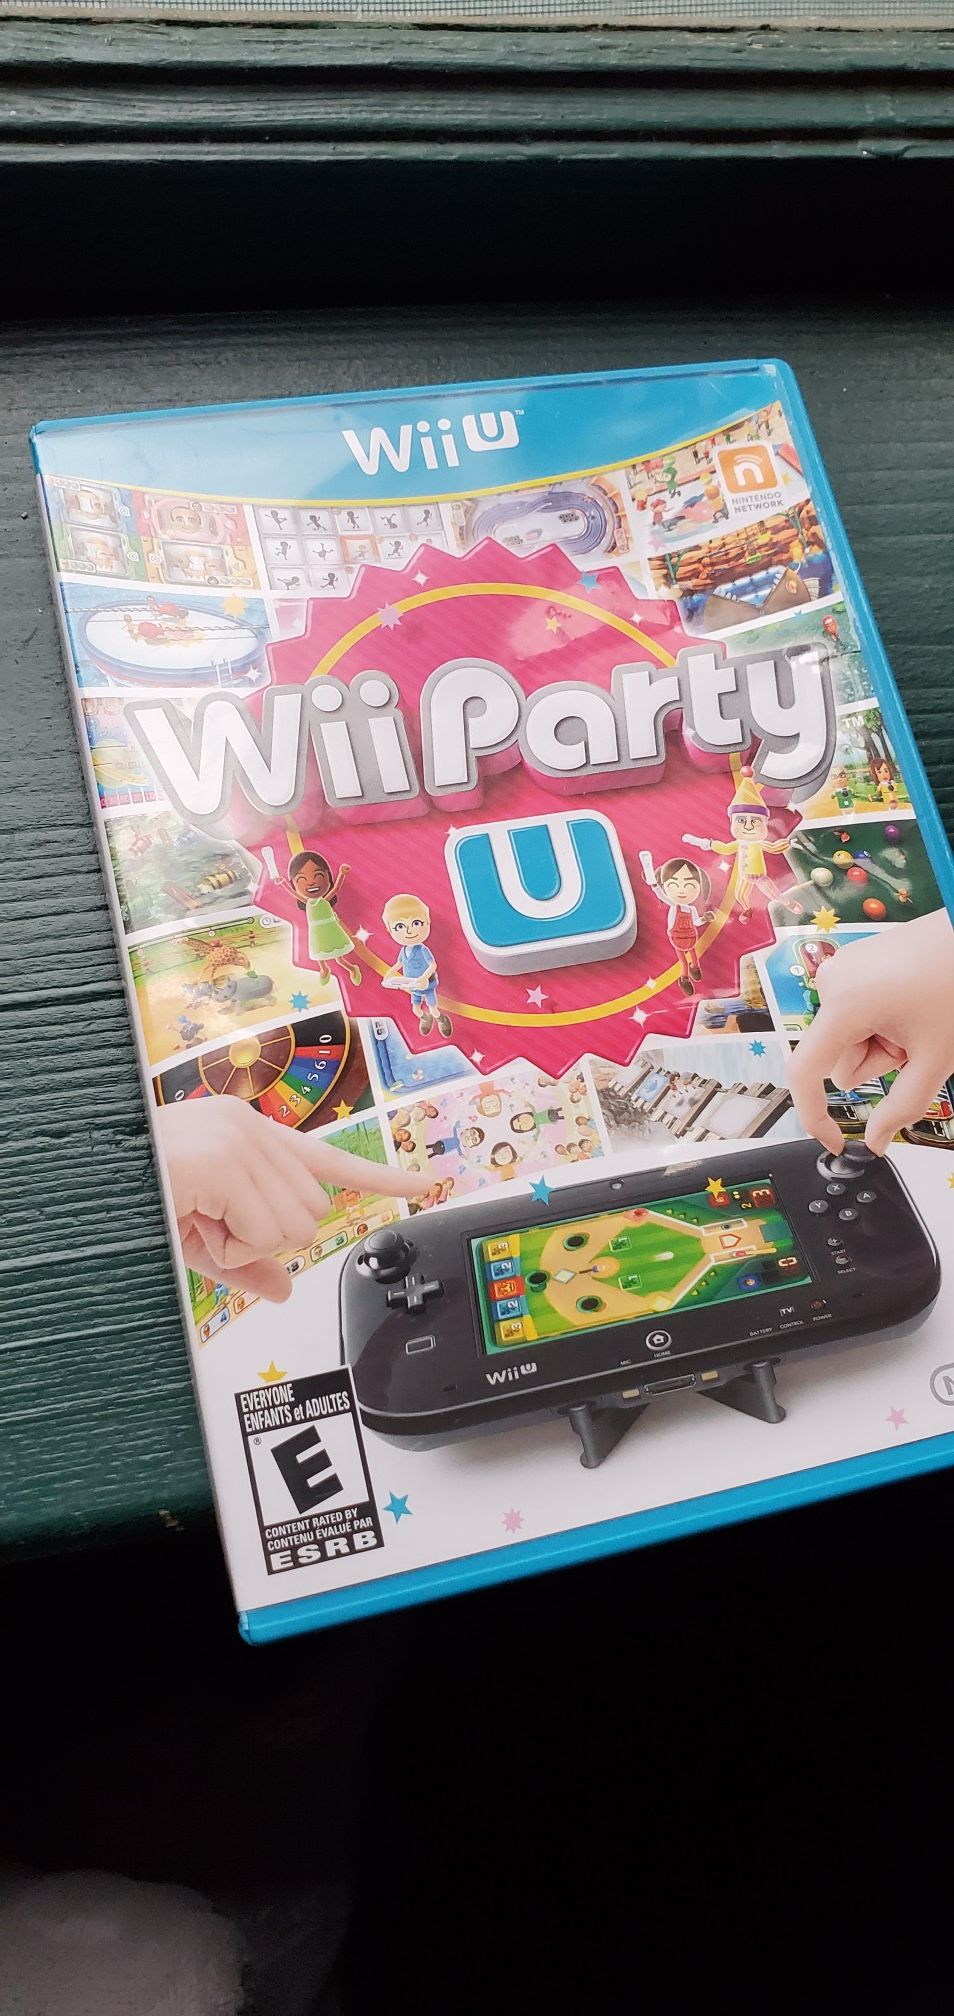 Wii U Games 3 for 15$